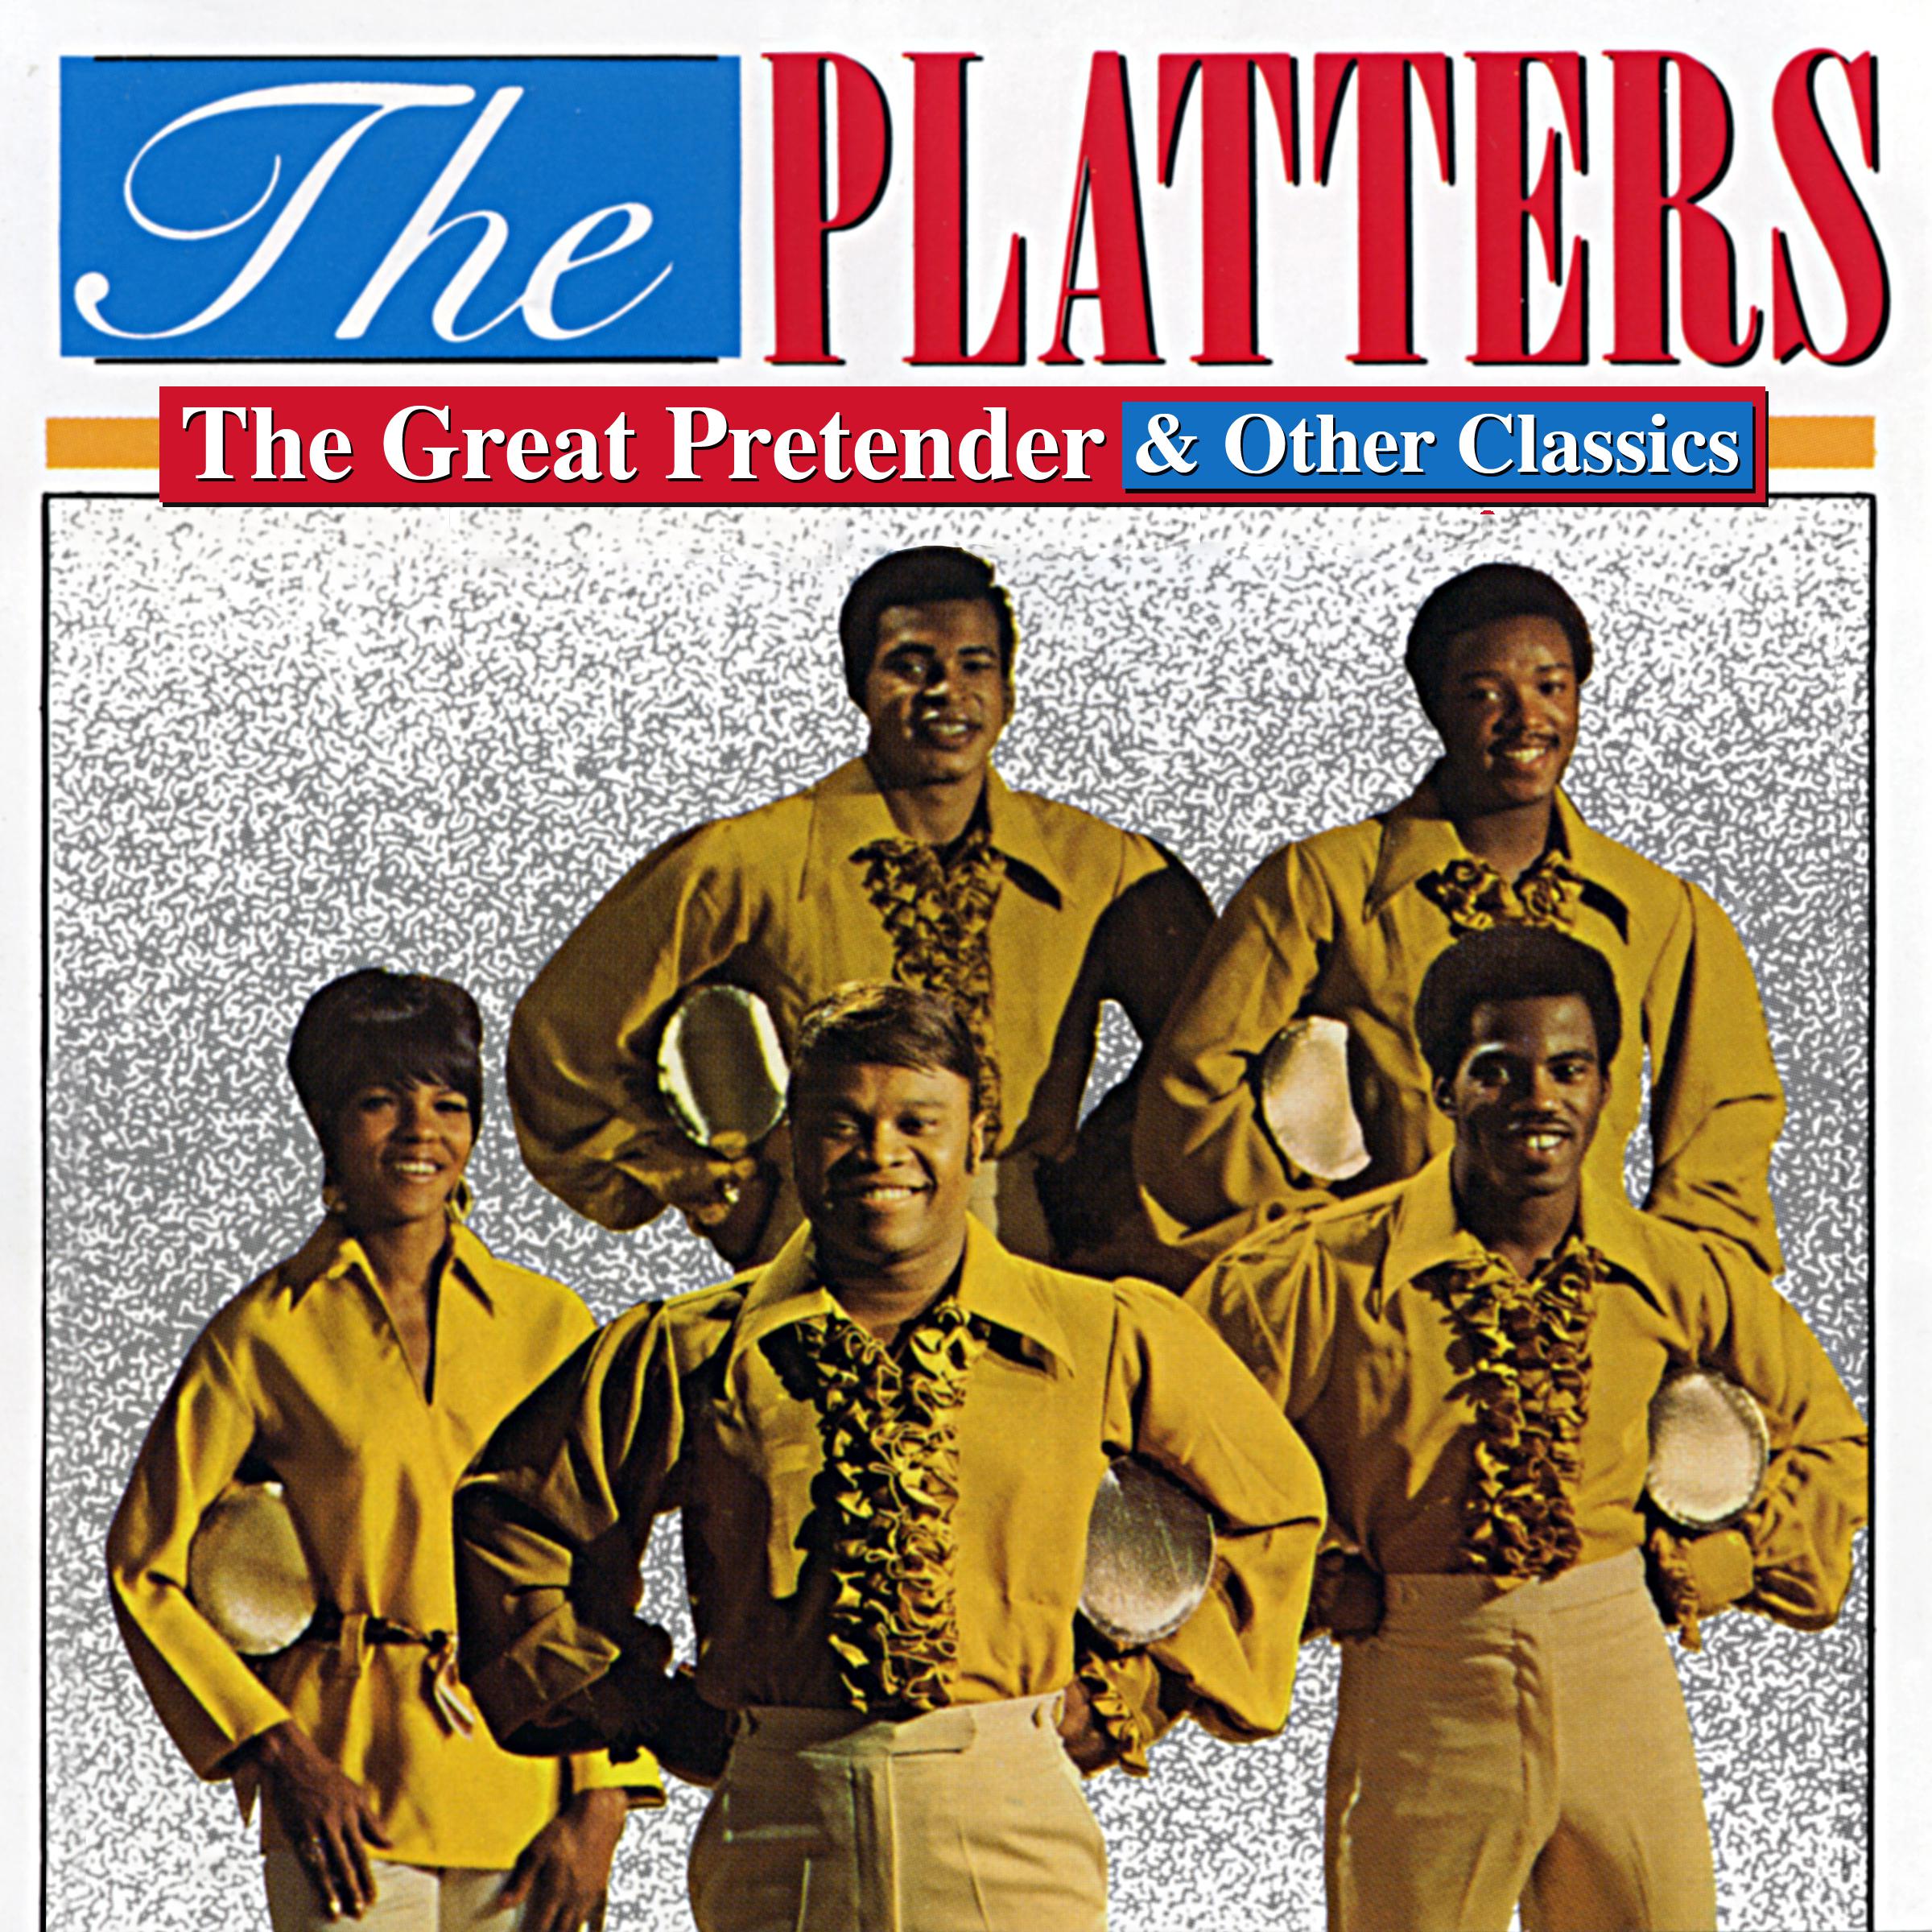 The Great Pretender & Other Classics